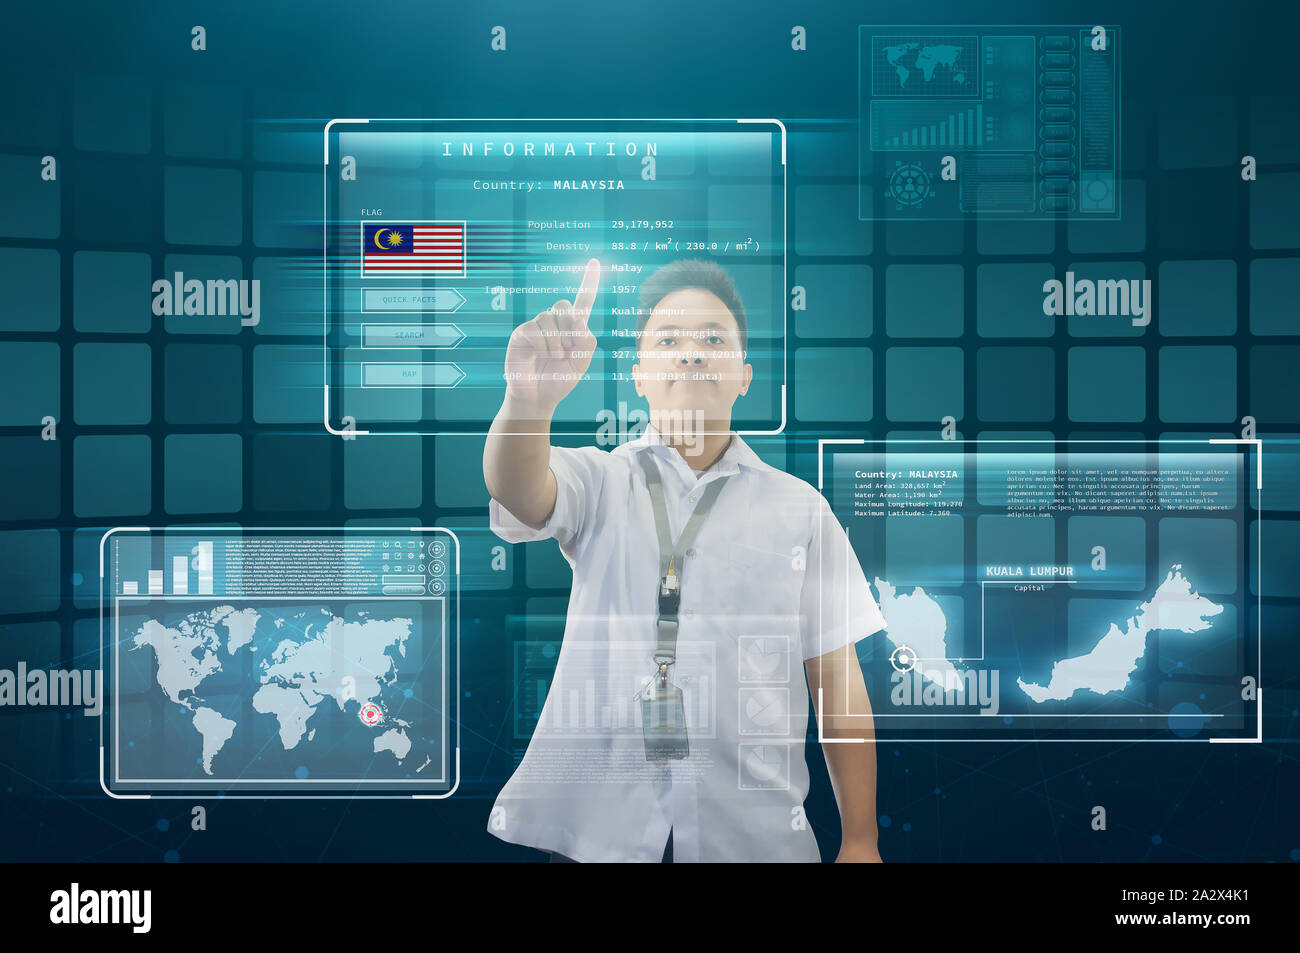 Student studying about Malaysia. Student wearing school uniform using hologram screen to study and research about Malaysia. Stock Photo